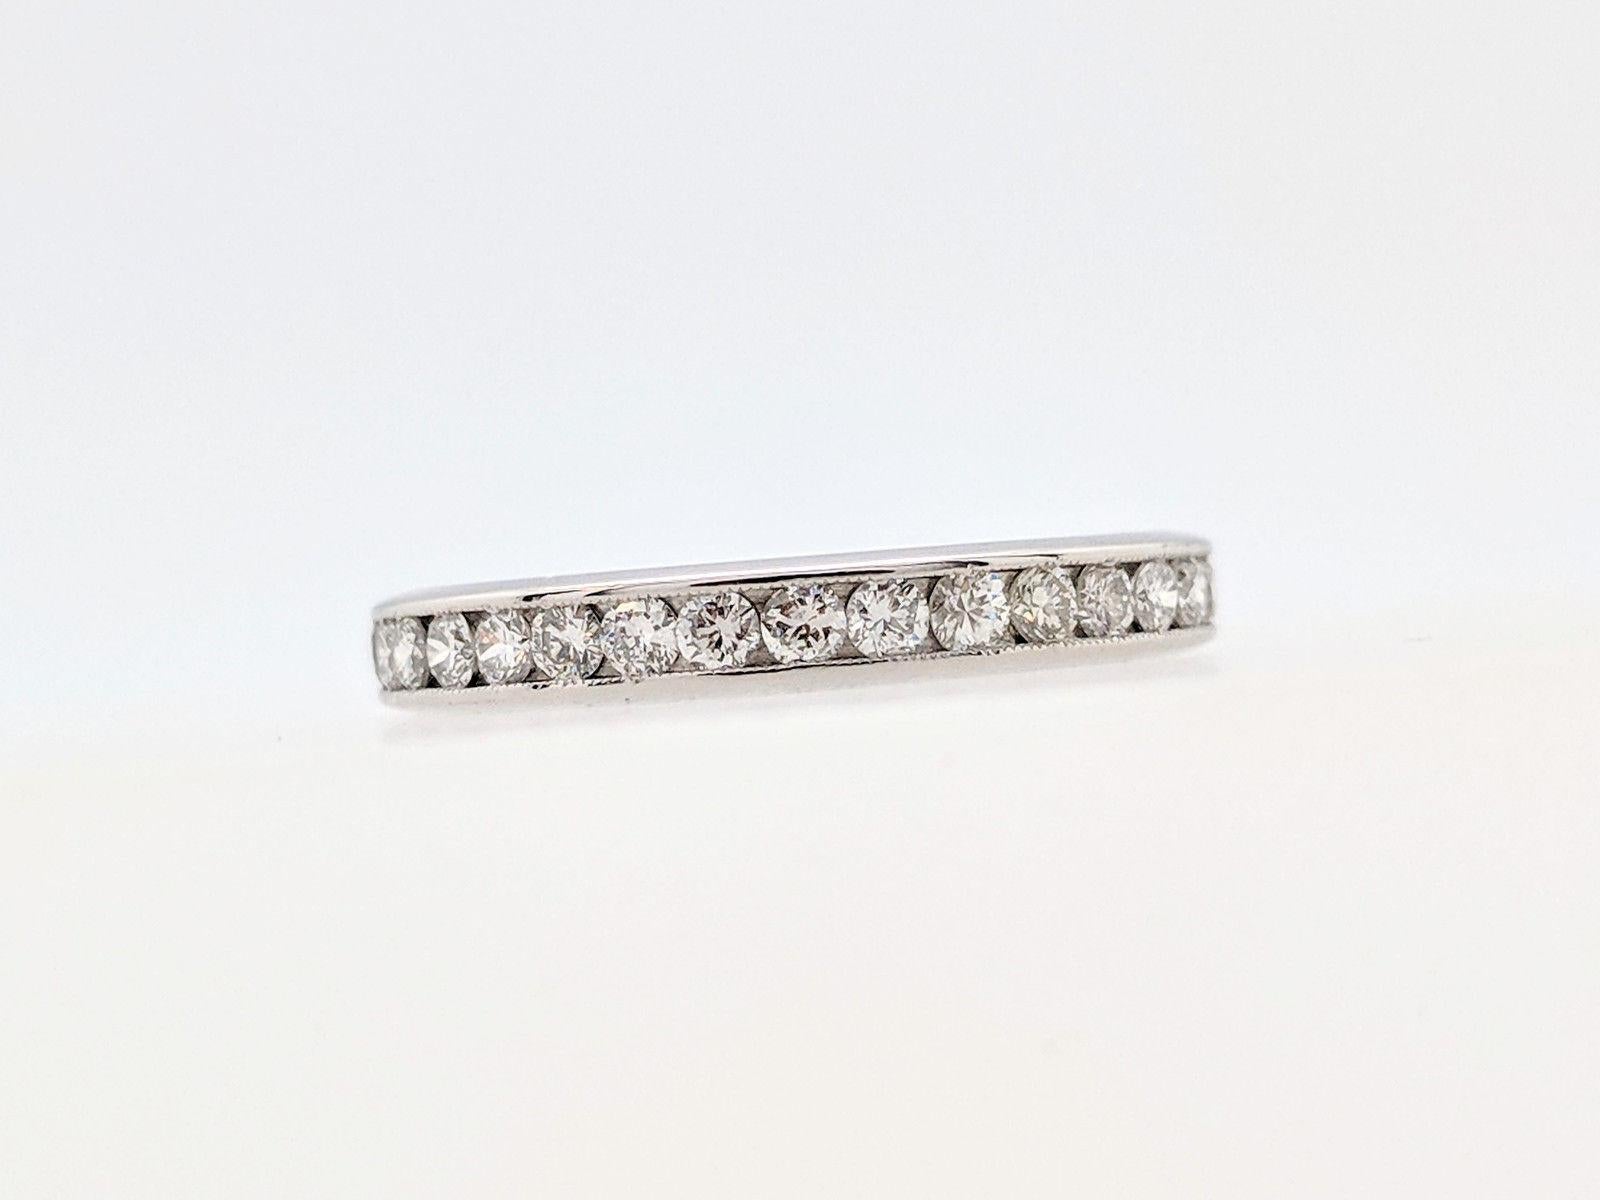 You are viewing a Stunning Diamond Eternity Band. This ring is crafted from platinum and features (33) .03ct natural round diamonds for an estimated 1ctw. We estimate the diamonds to be SI1 in clarity and G in color. This ring weighs 3.3 grams, is